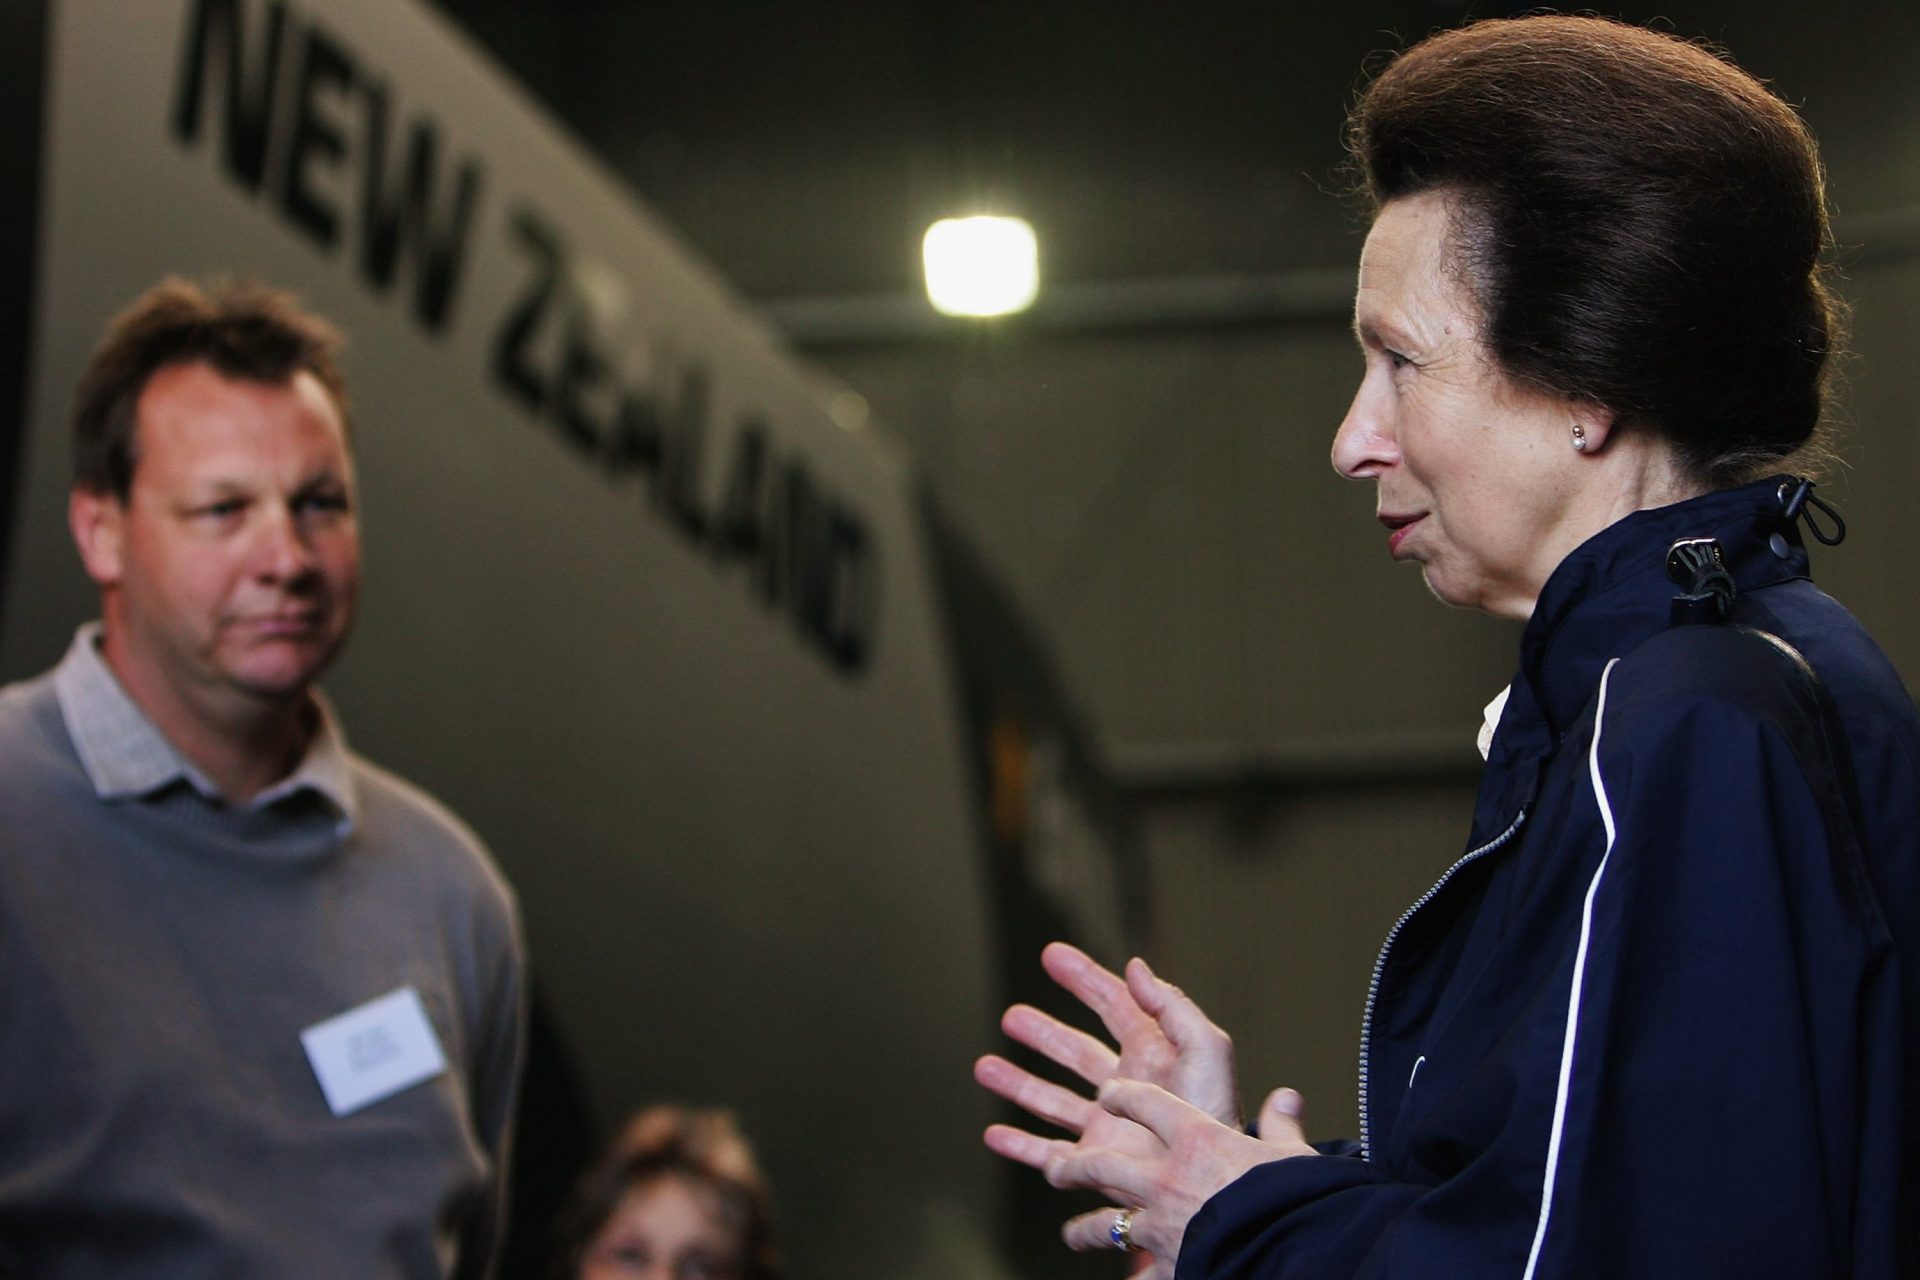 <p>Even Princess Anne, Charles's younger sister, likes to explore the country. In 2006 she paid Auckland an official visit. She also made very clear through her reading matter where she was headed next.</p>